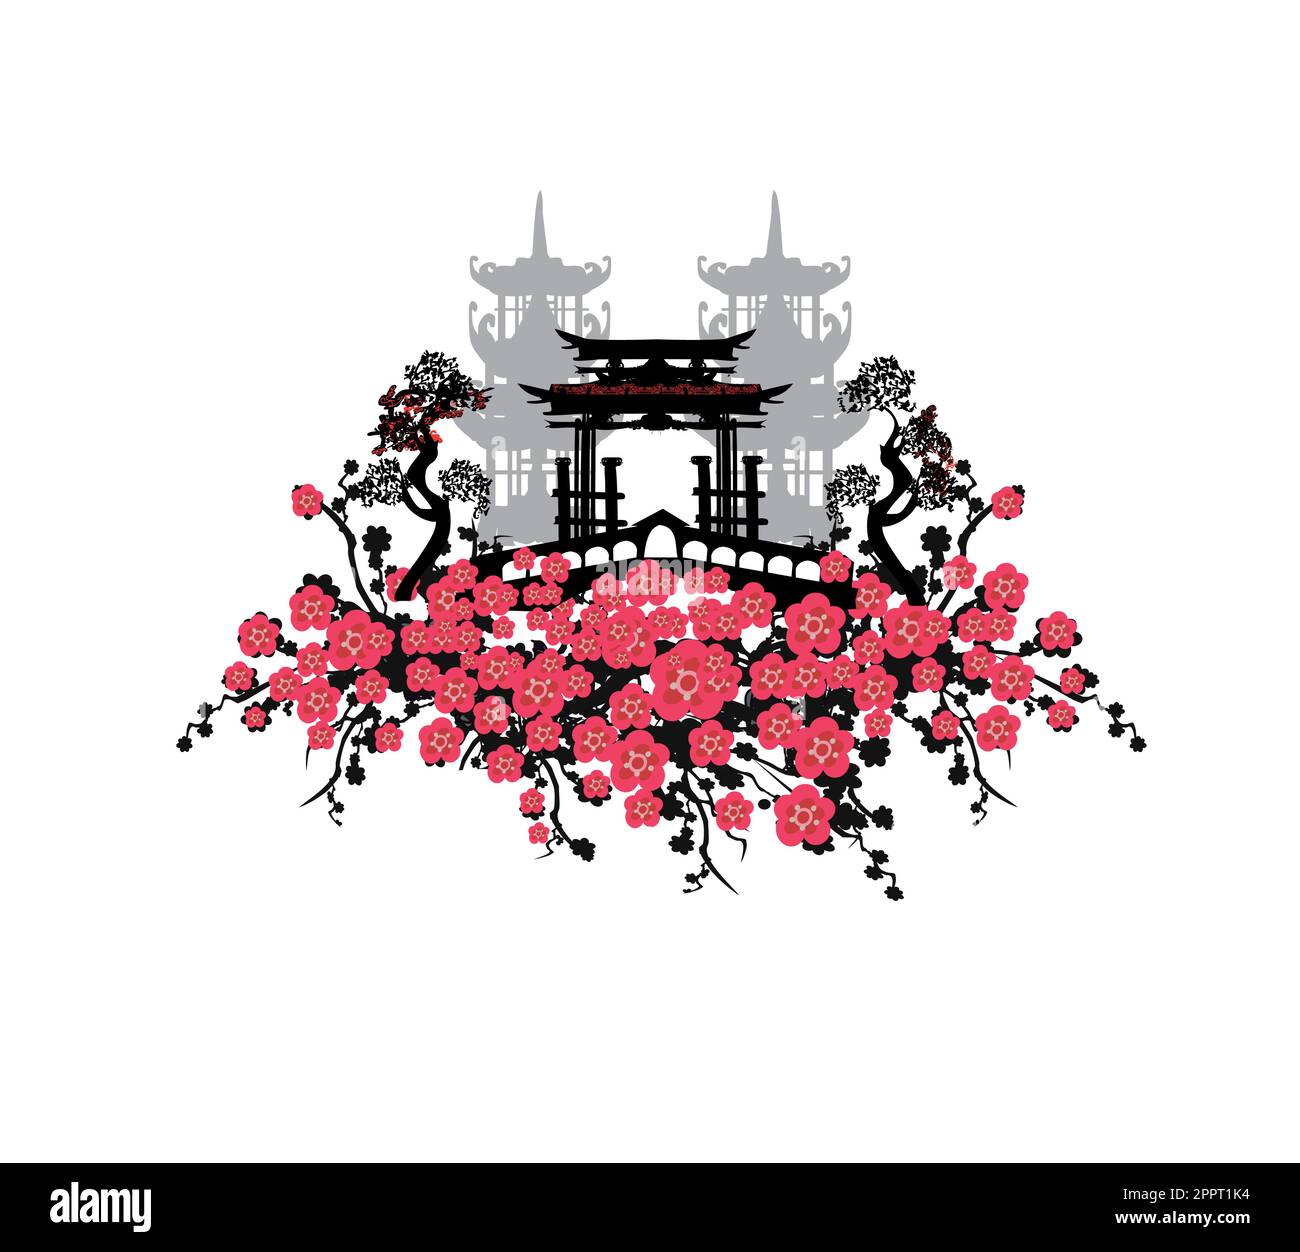 Japanese city with traditional architecture - beautiful decorative banner with  buildings and cherry blossoms Stock Vector